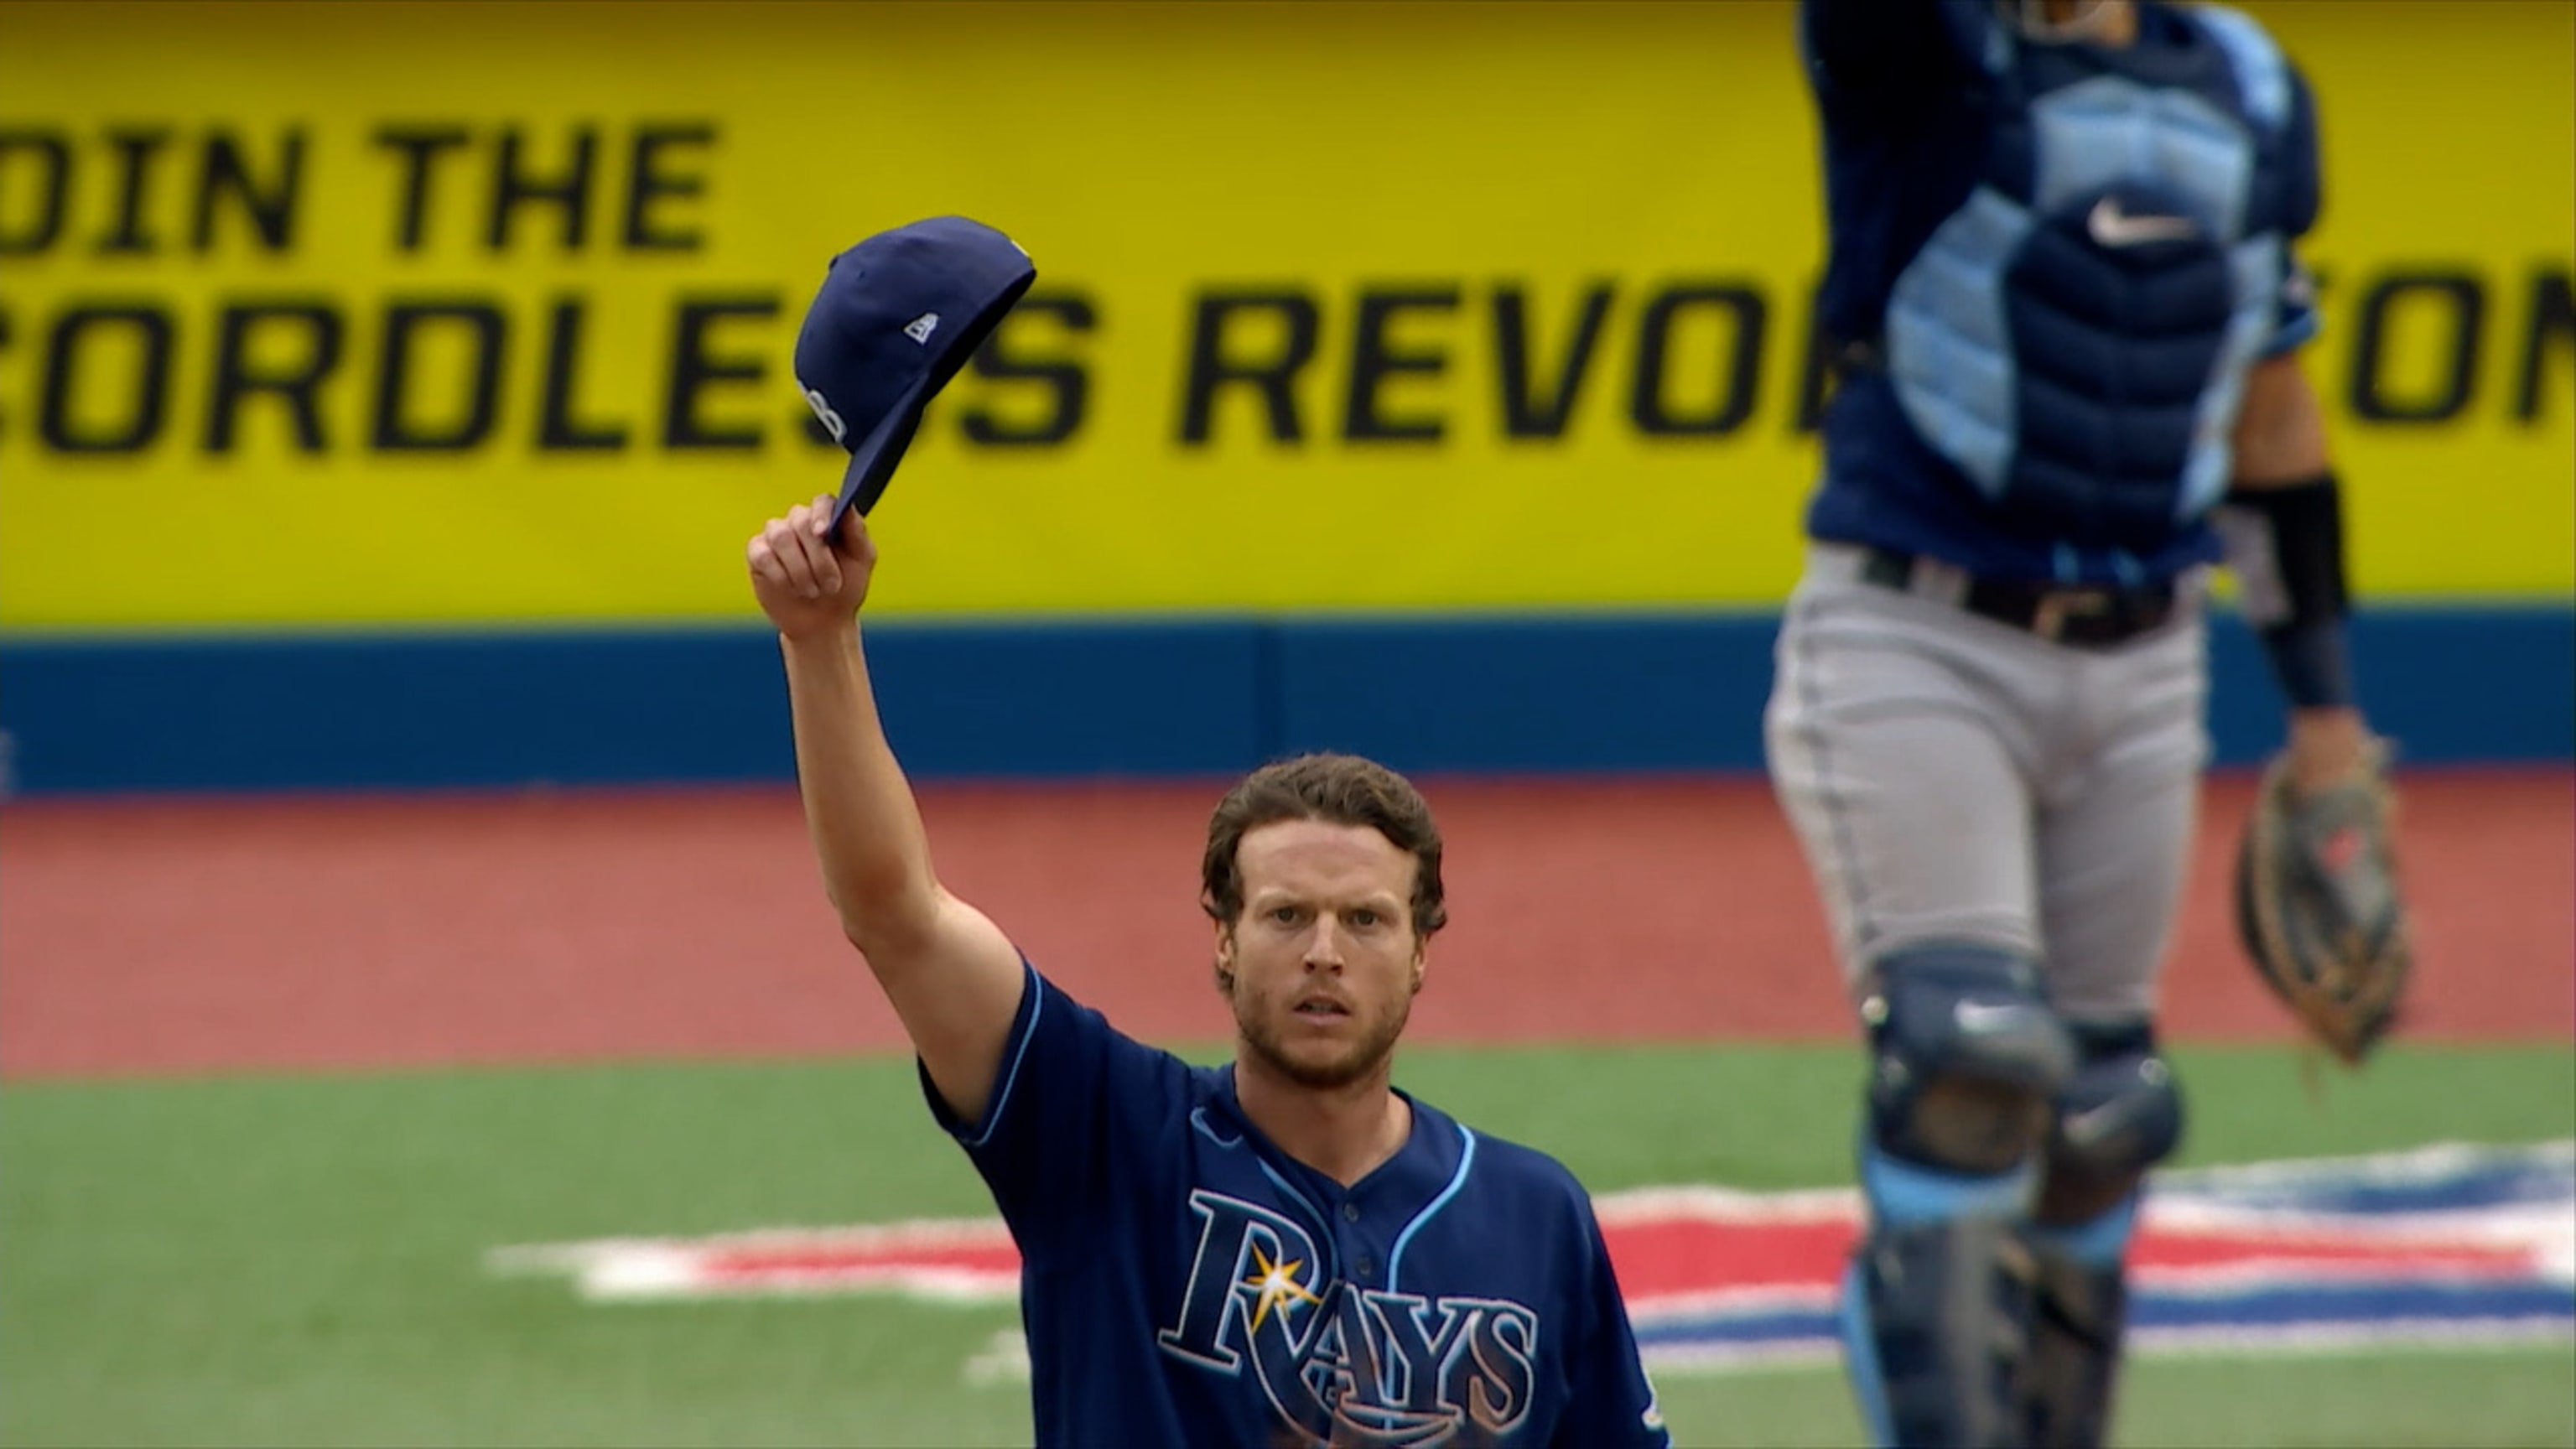 BREAKING NEWS: The Blue Jays are signing Kevin Kiermaier, addressing need  in outfield